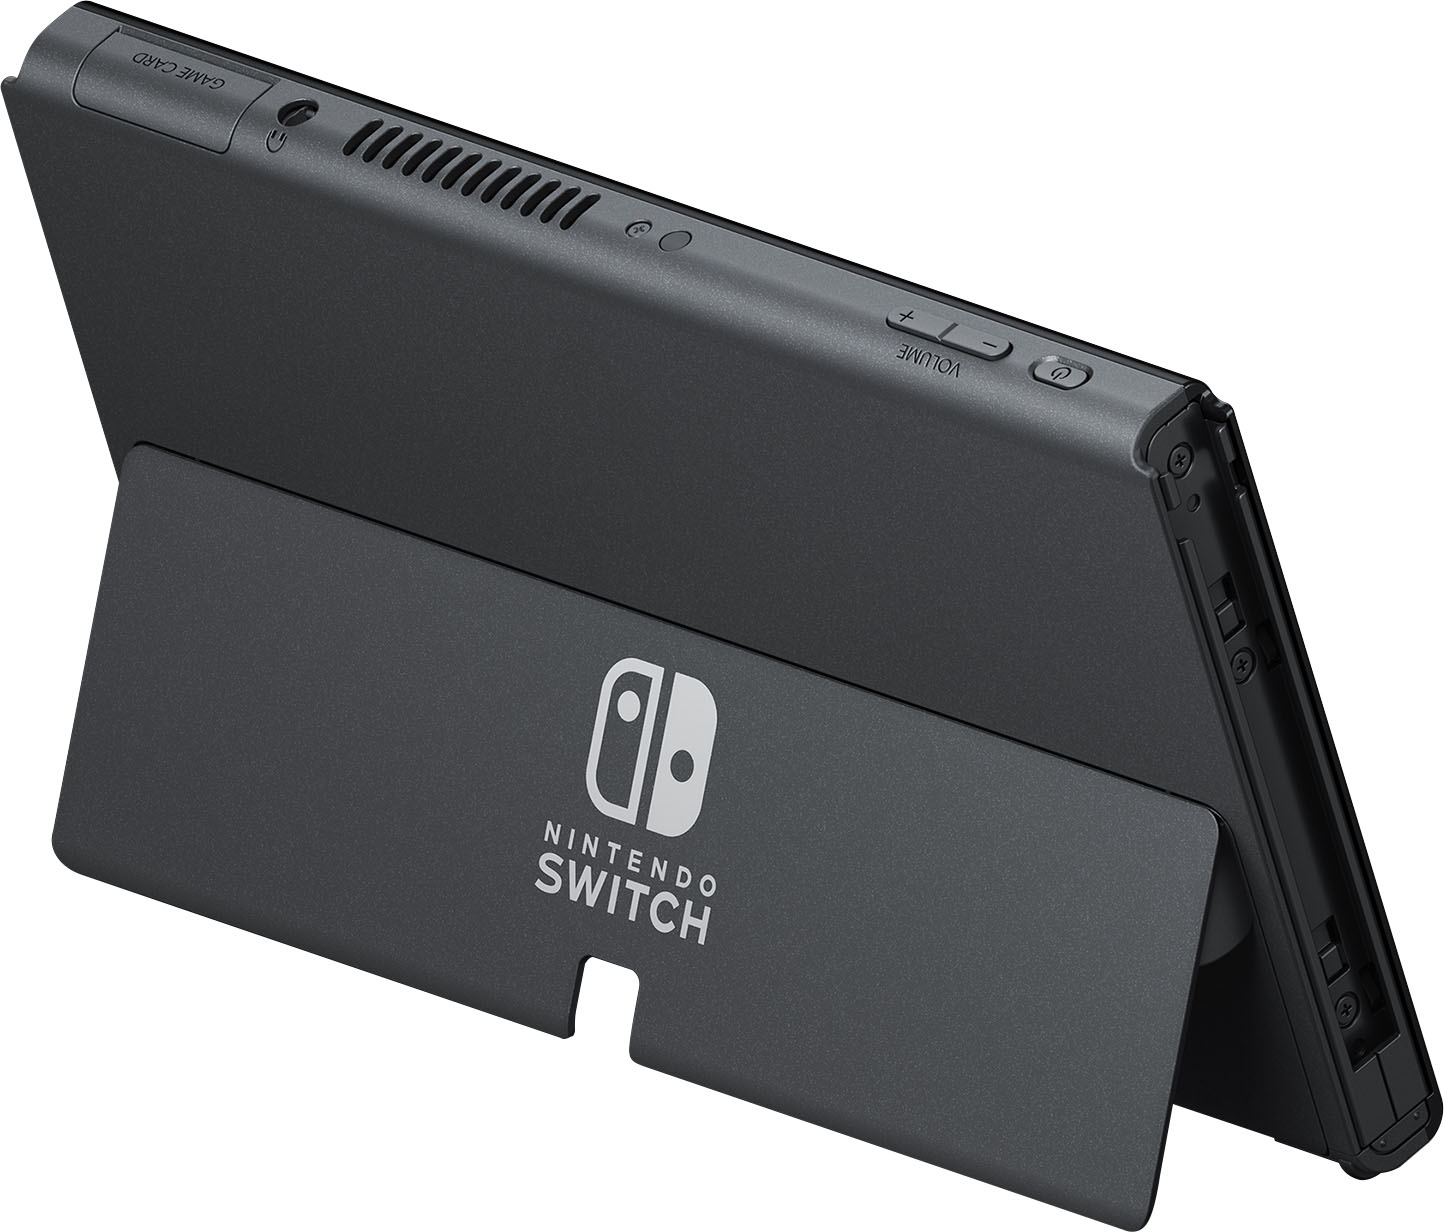 Nintendo Switch OLED consoles now starting from $290 shipped for